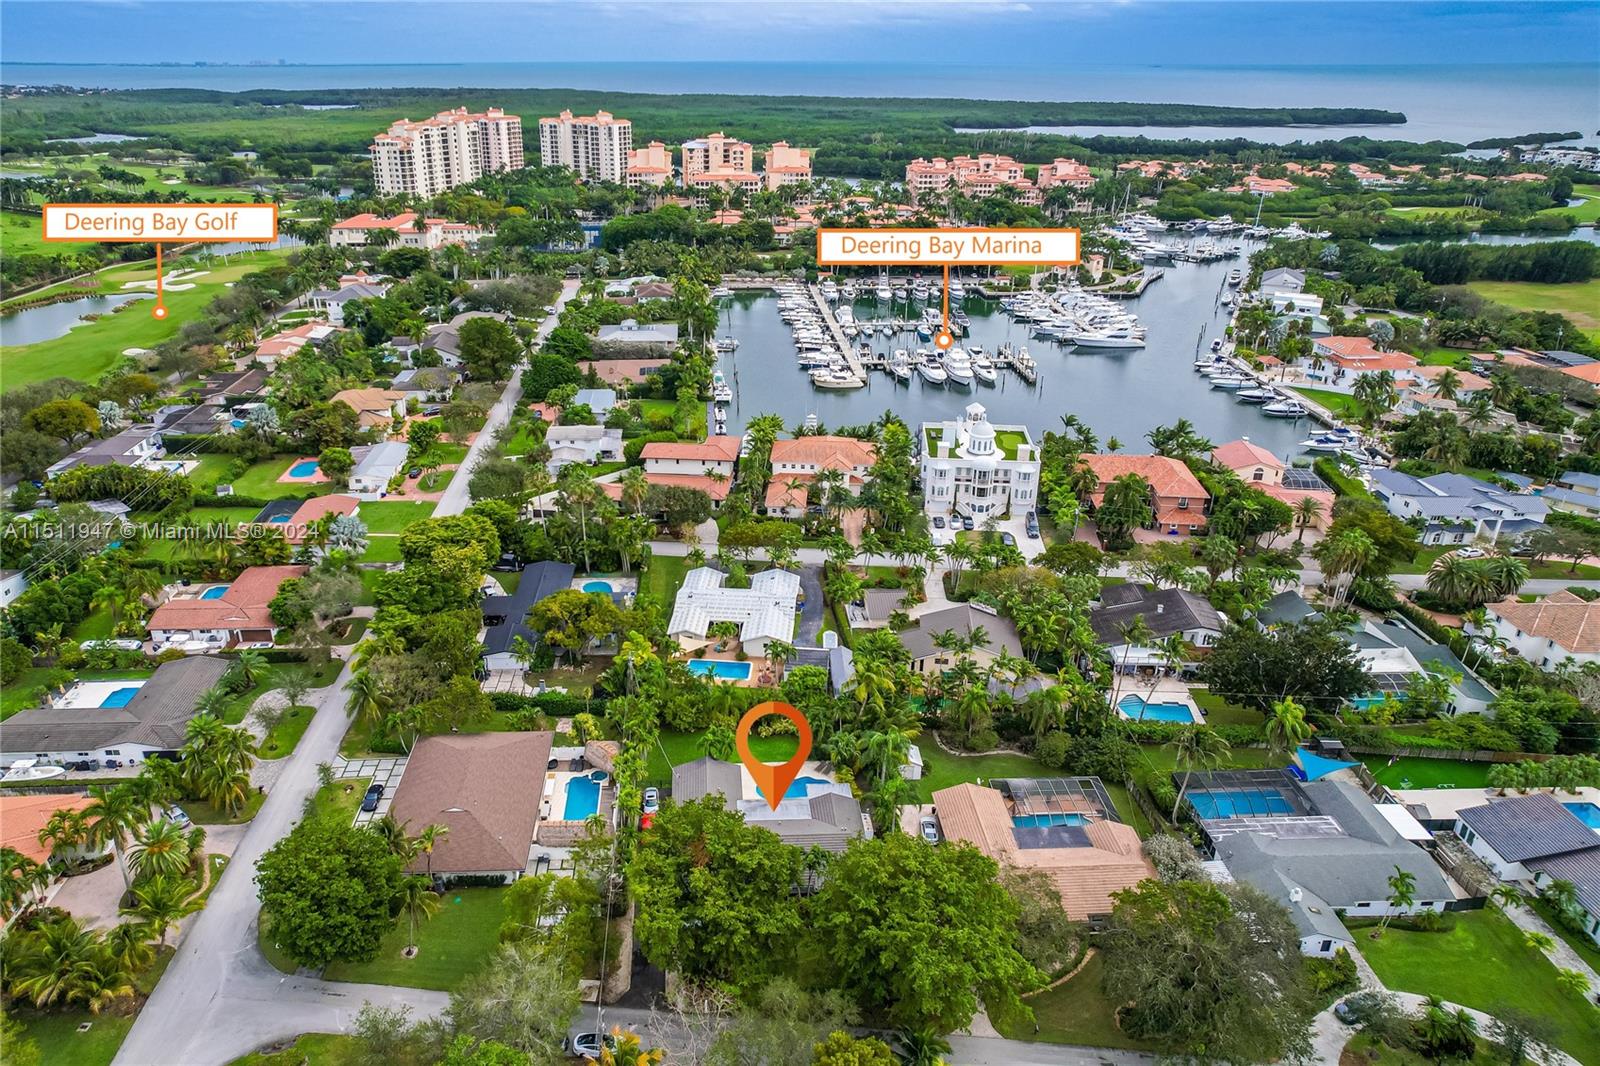 Welcome to this exclusive Private Marina Community in South Coral Gables. This tastefully renovated 5BR/3.5BA/3,000+sf/15,150sf lot property offers a unique opportunity for Kings Bay Residents. Enjoy 24-hour access to the Deering Bay Marina, with no bridges to Bay or Ocean. Guard-gated, tranquil Kings Bay community is perfect for families and offers a golfer's paradise, with Deering Bay within walking distance. Home boasts new roof and 2 new A/Cs, heated pool, spacious kitchen with S.S. appliances, formal dining and living areas, and an office space. Excellent choice for entertaining and family gatherings. This property is conveniently located near nationally ranked schools, fine shopping, and dining options.